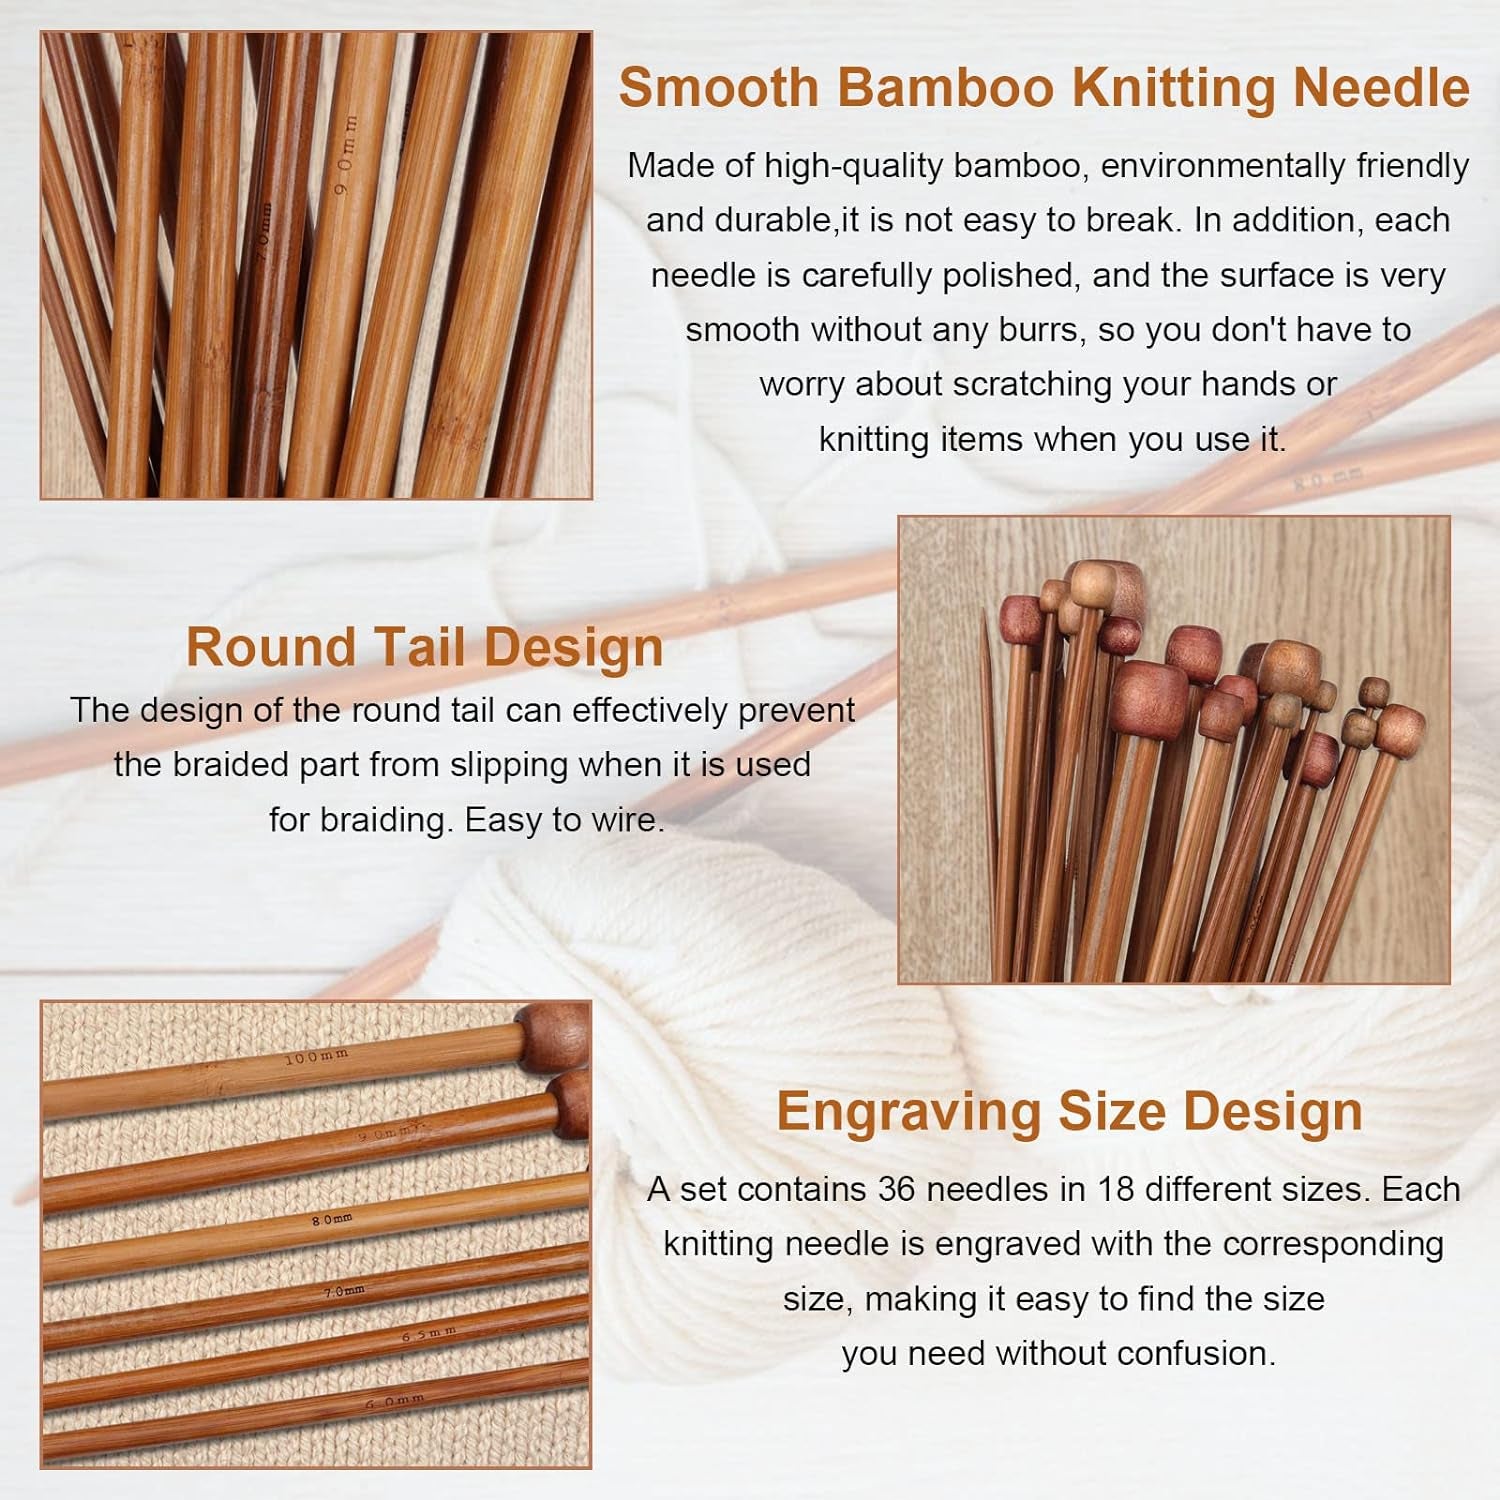 Bamboo Knitting Needles 18 Pairs Knitting Needles Set - 10 Inches Wooden Knitting Needle Single Point Knitting Needles with Roll Bag - Portable Knitting Needle Set for Beginners (2Mm - 10Mm)